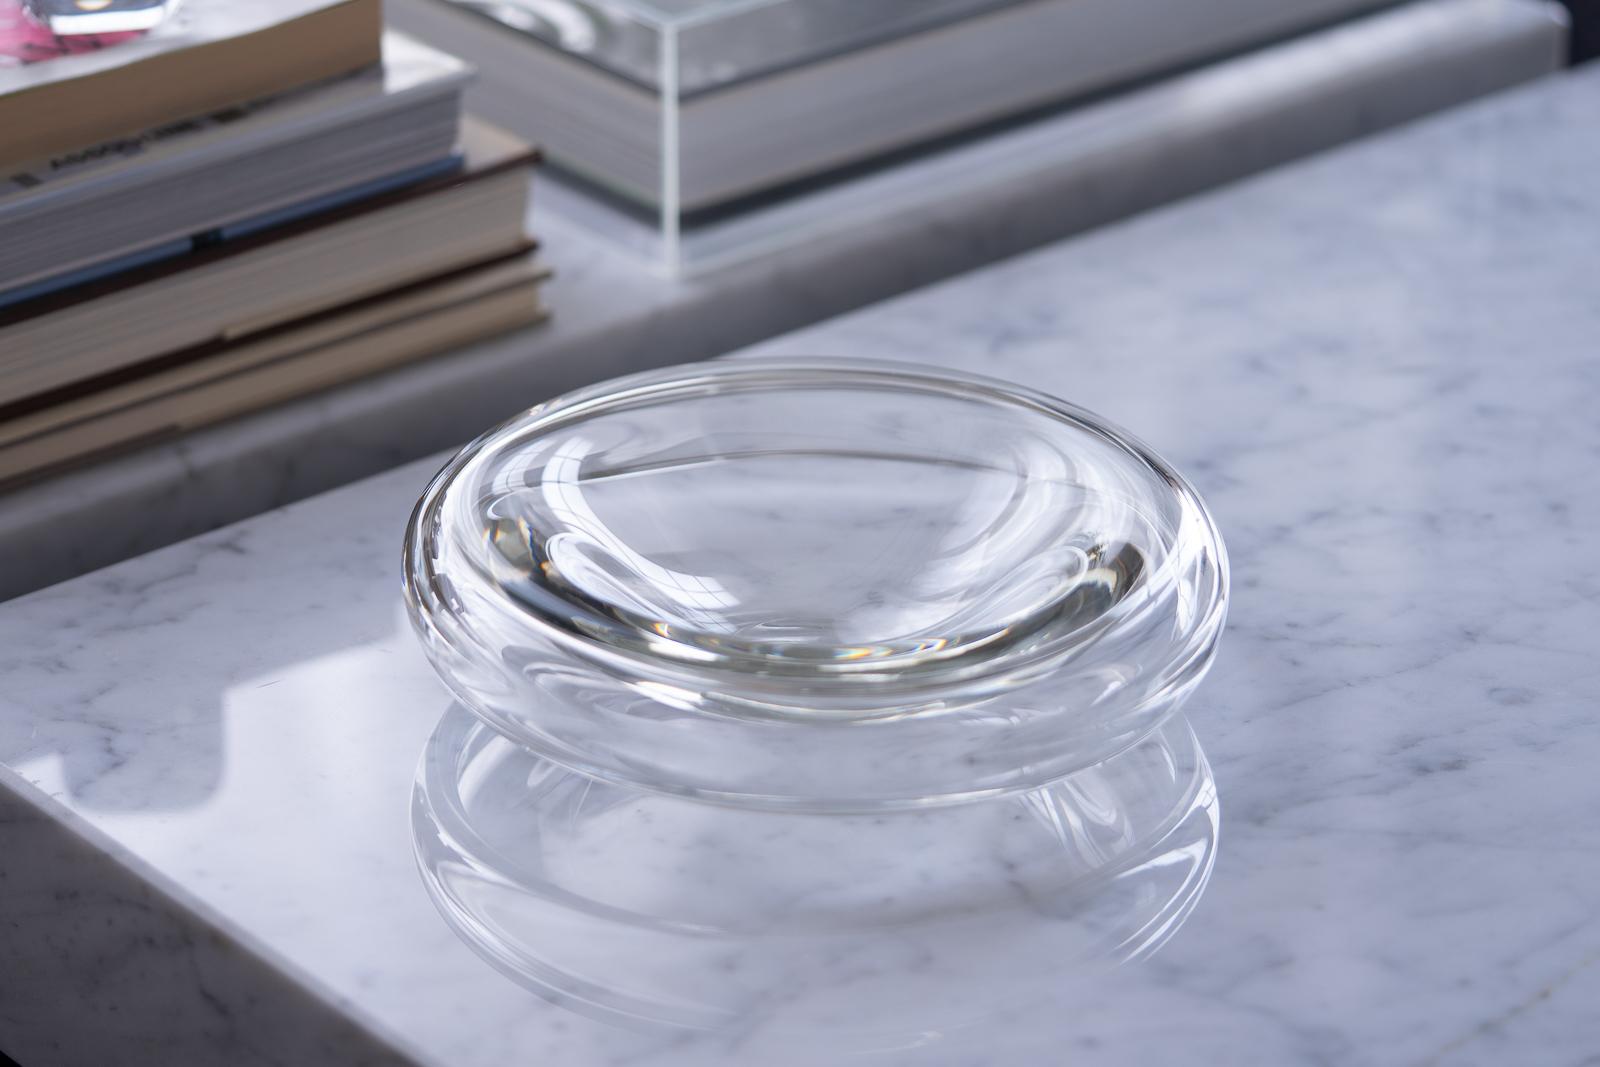 A beautifully crafted clear blown glass bowl or dish designed by father and son Alfredo & Flavio Barbini for Barbini Murano in 1972. Thick glass walls round out and downwards at its sides giving the piece the appearance of hovering above the